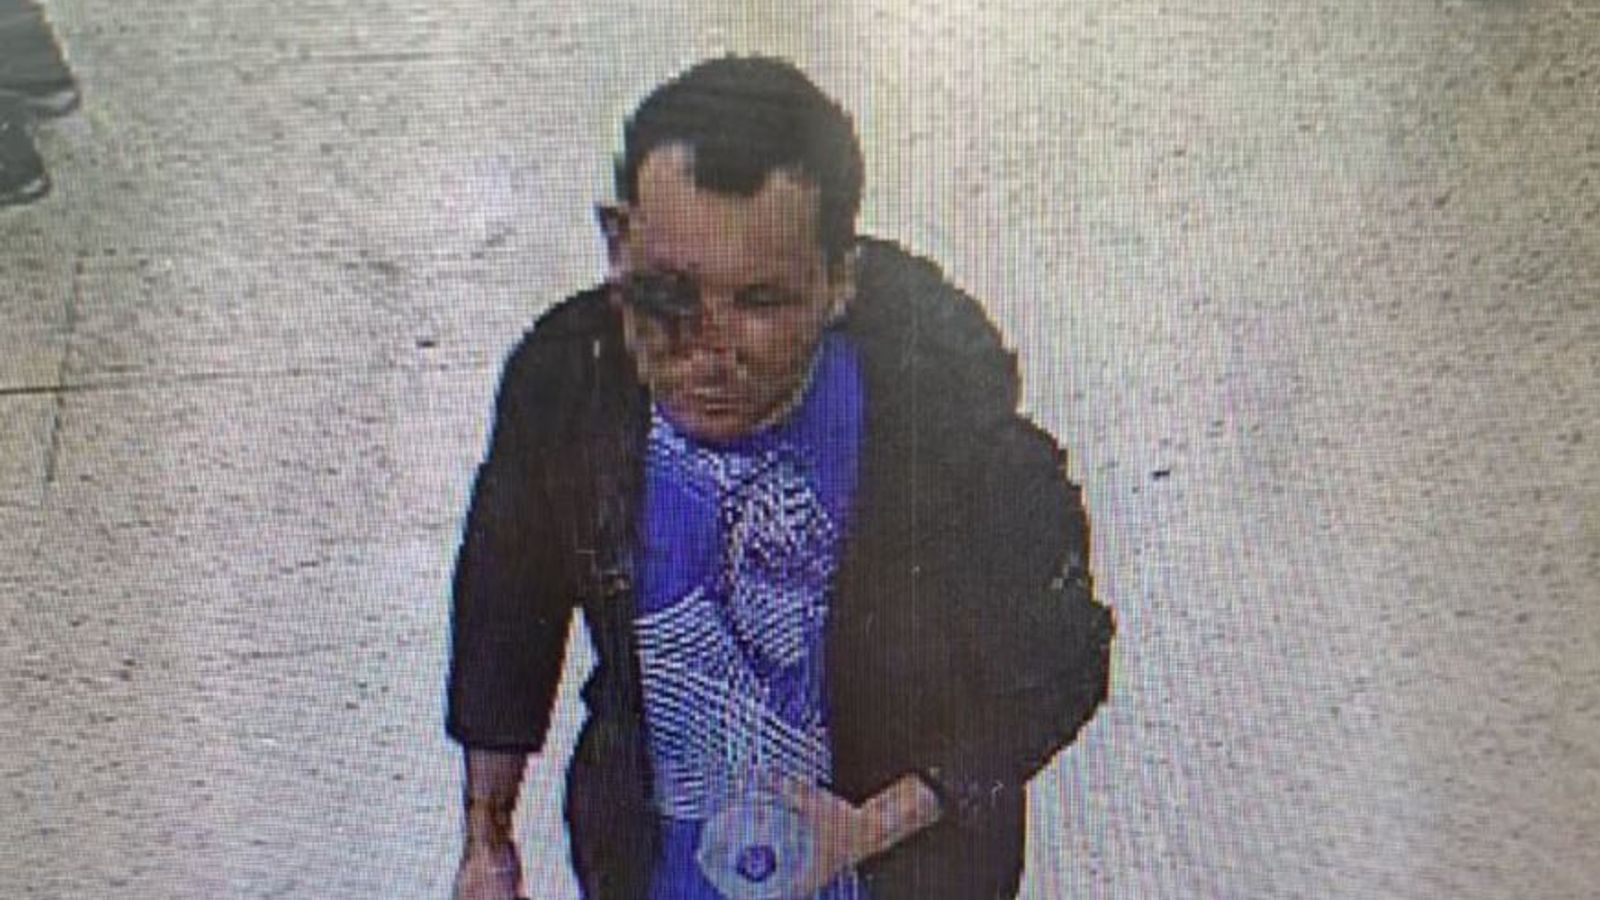 Clapham: Police issue photo of chemical attack suspect with facial injuries at Tesco store